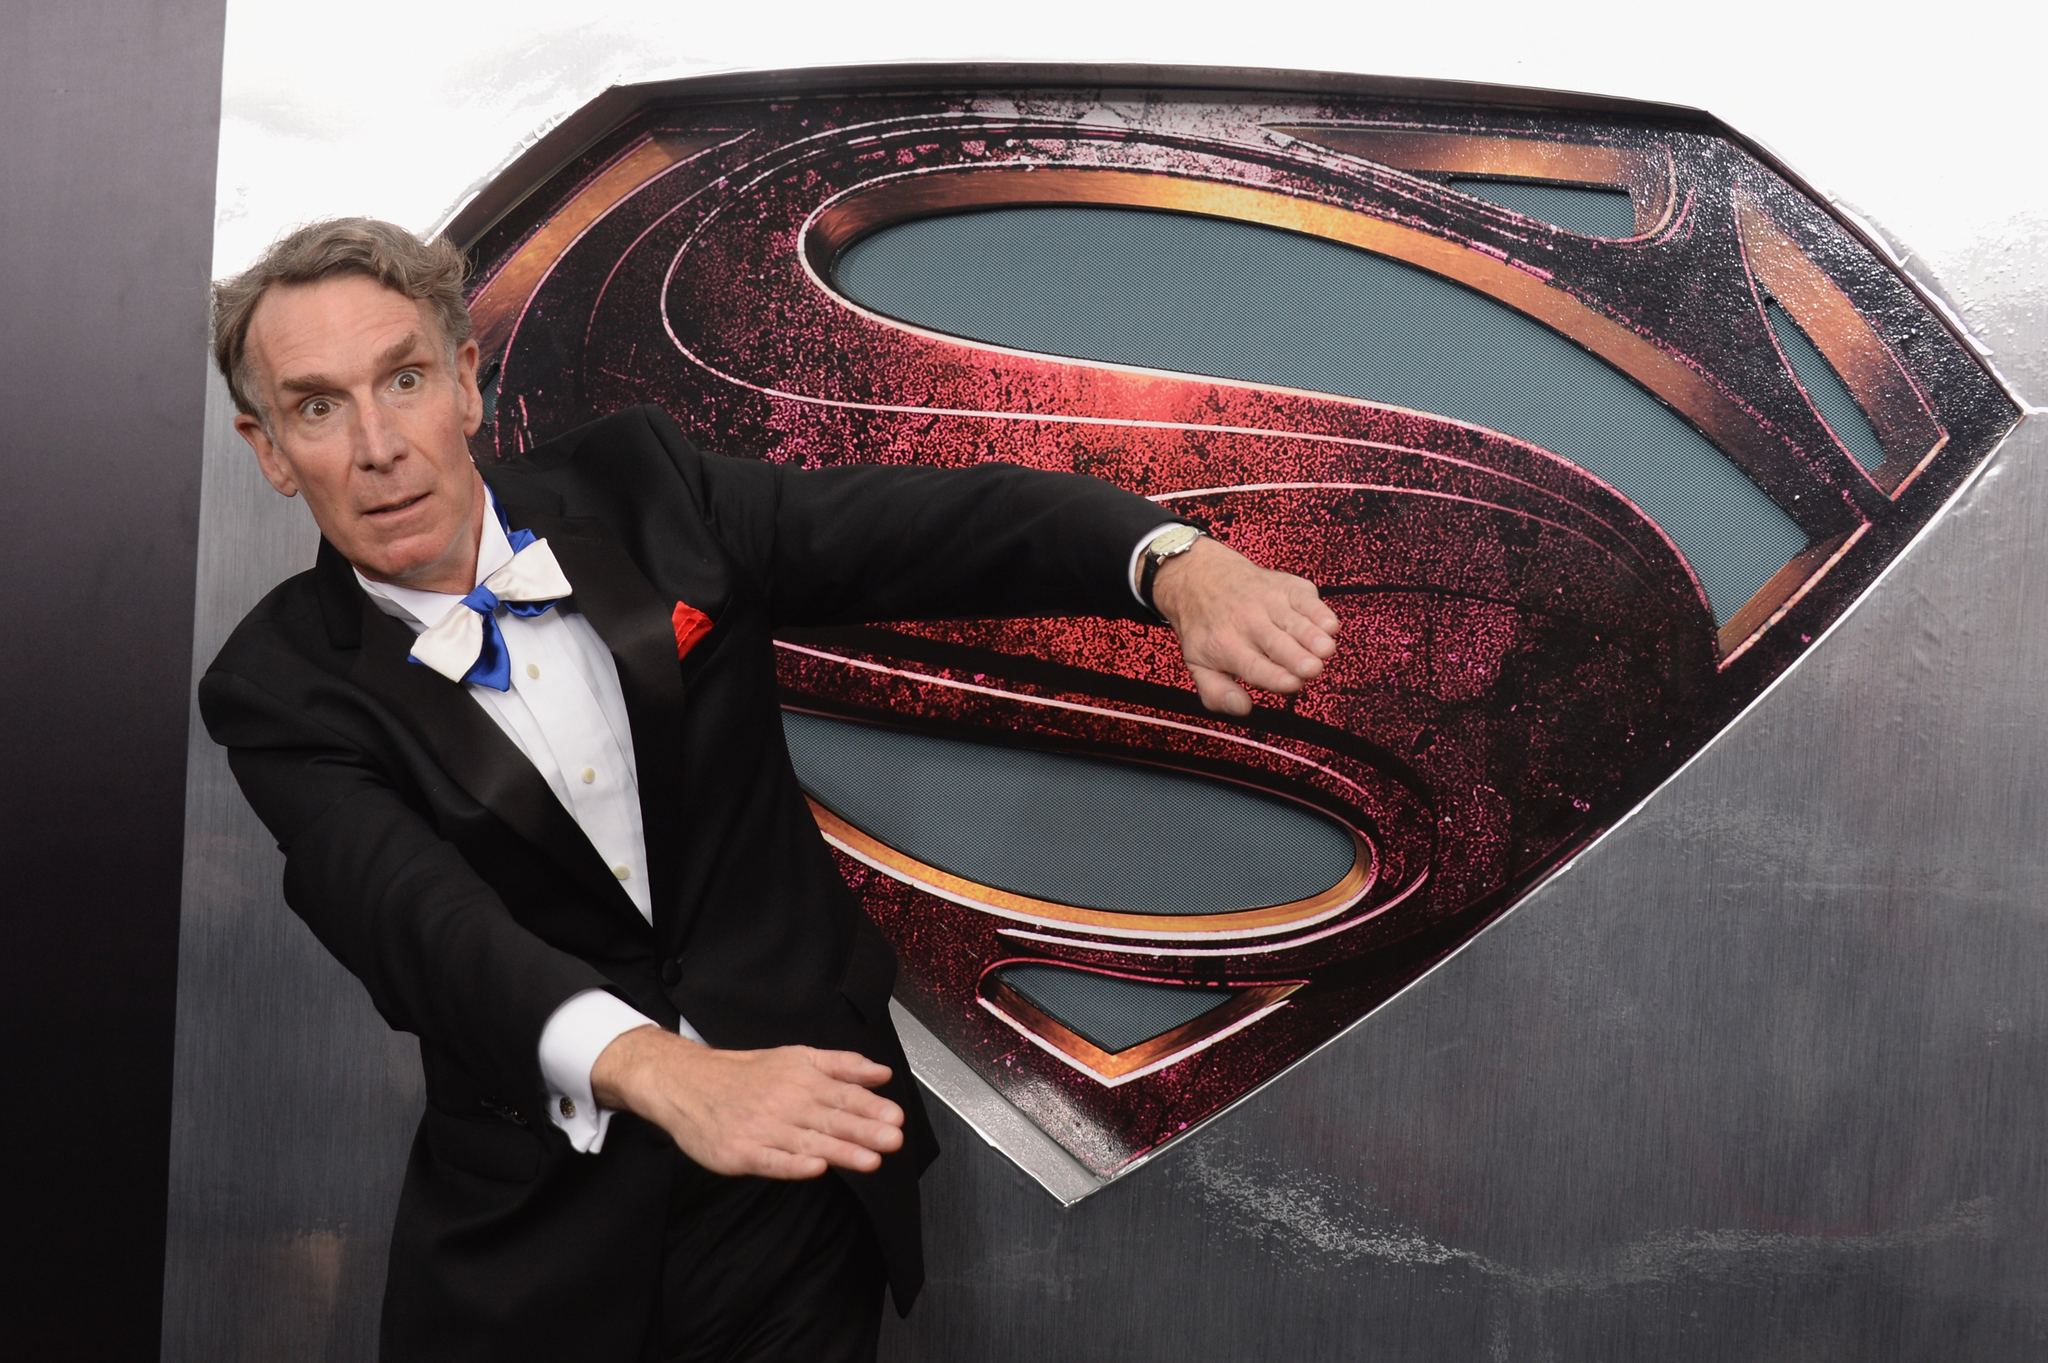 Bill Nye at event of Zmogus is plieno (2013)